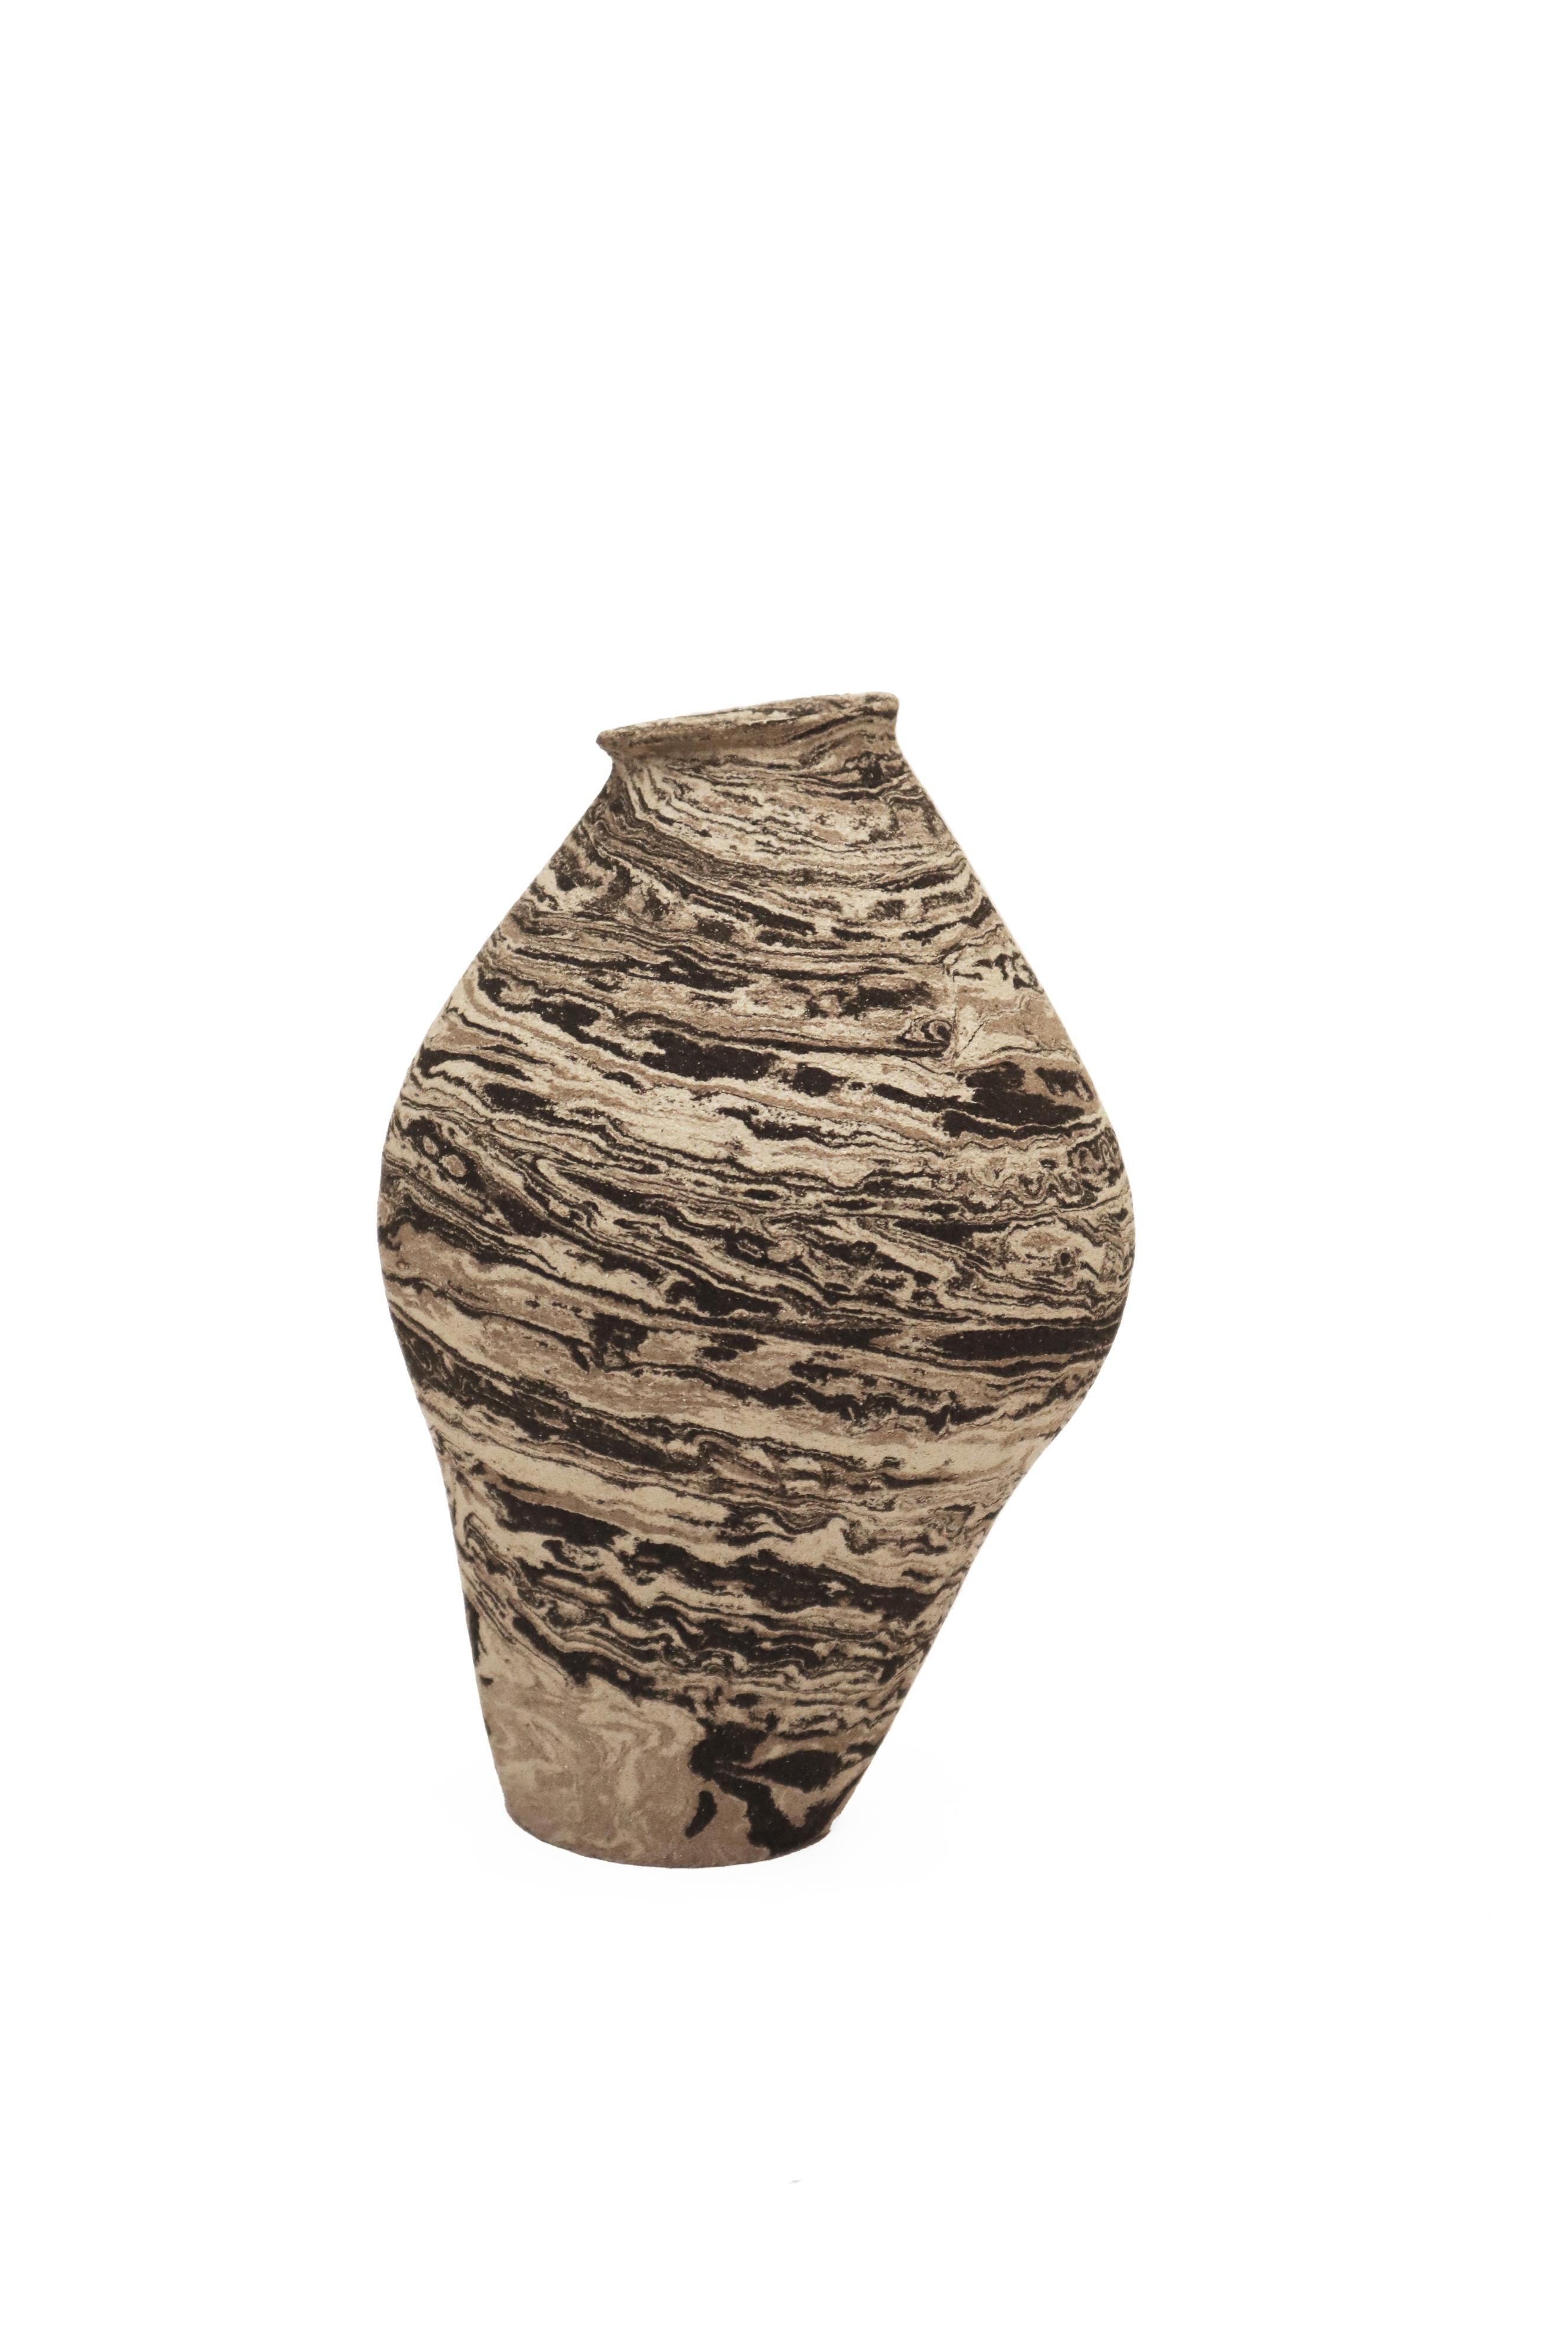 Stomata 9 vase by Anna Karountzou
Dimensions: W 12.5 x D 12.5 x H 23.5 cm
Materials: Mixed black, beige and white stoneware clay, clear glaze inside, fired at 1240

Born and based in Athens, Greece, with a background in conservation of works of